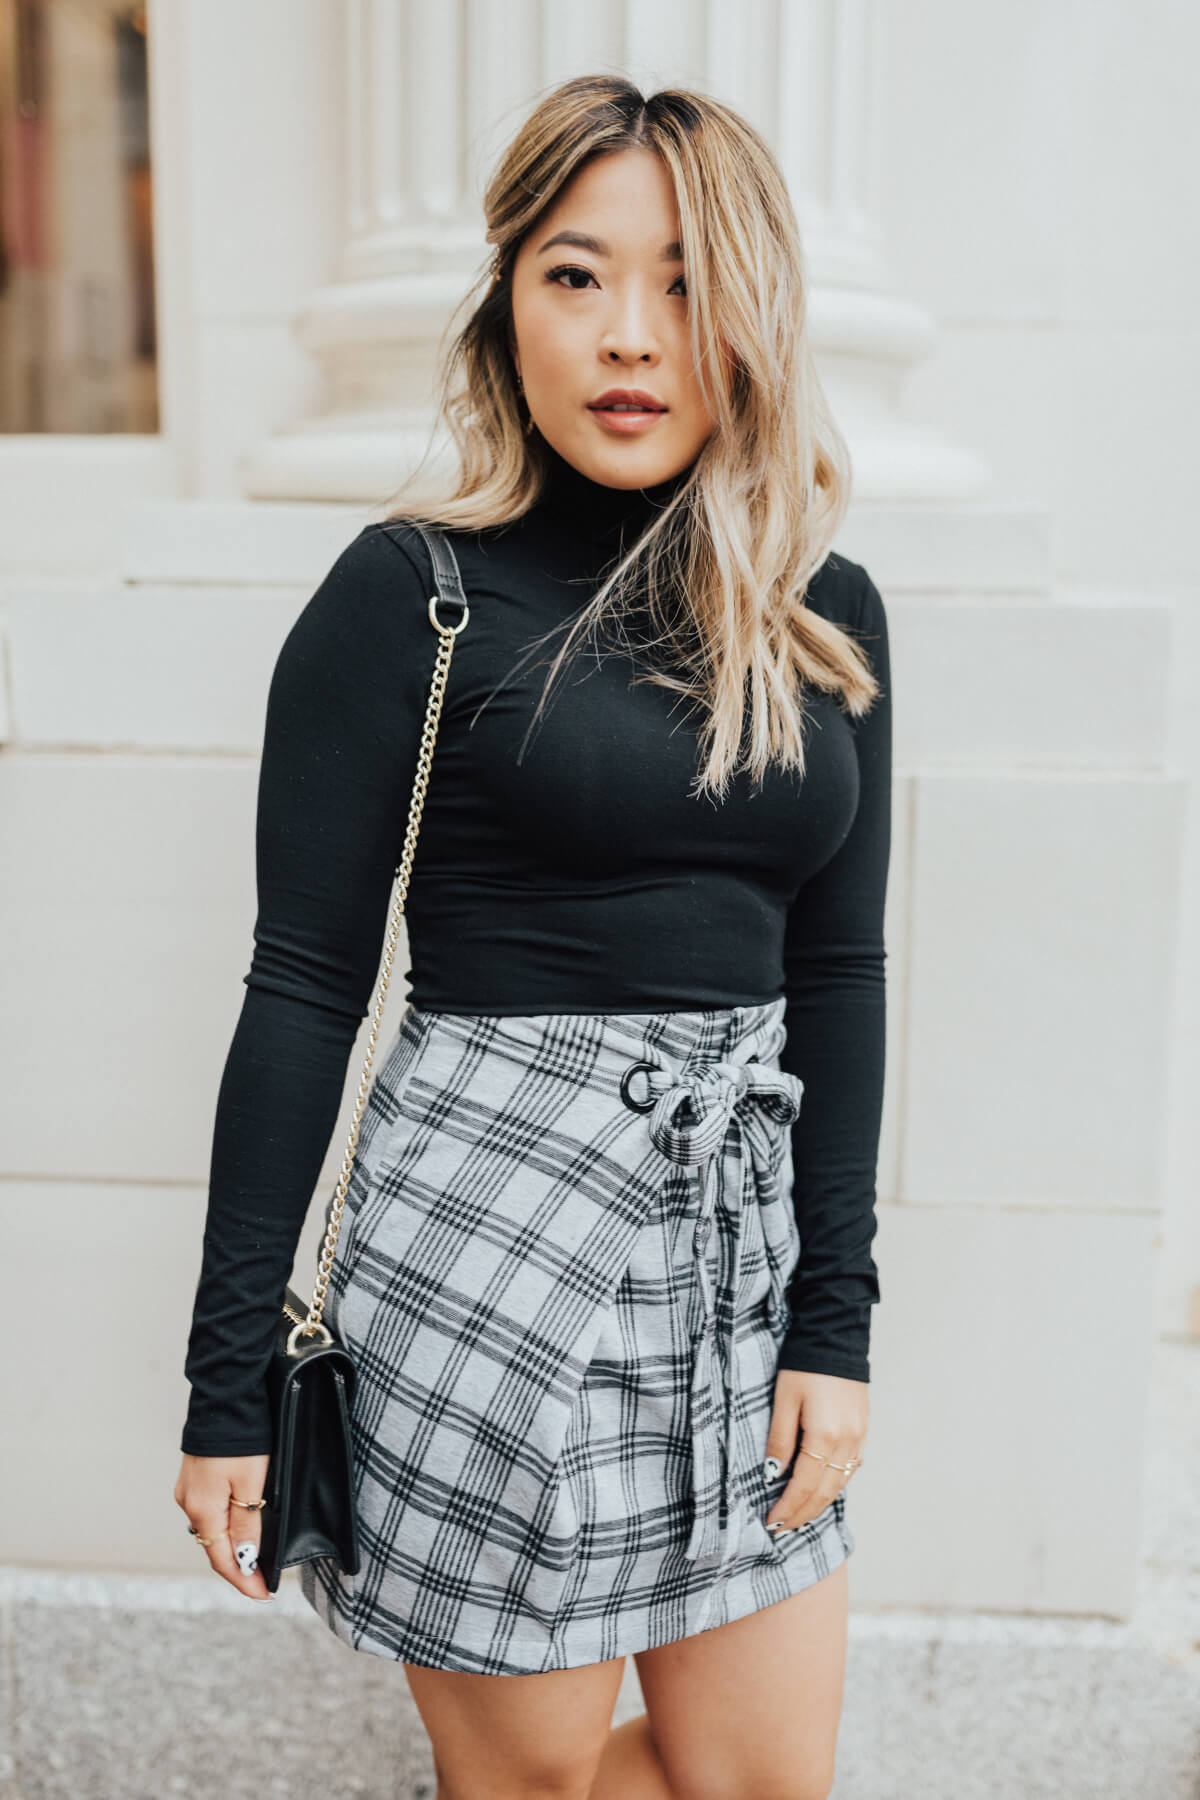 Gray and Black Plaid Patterned Boutique Mini Skirts for Women